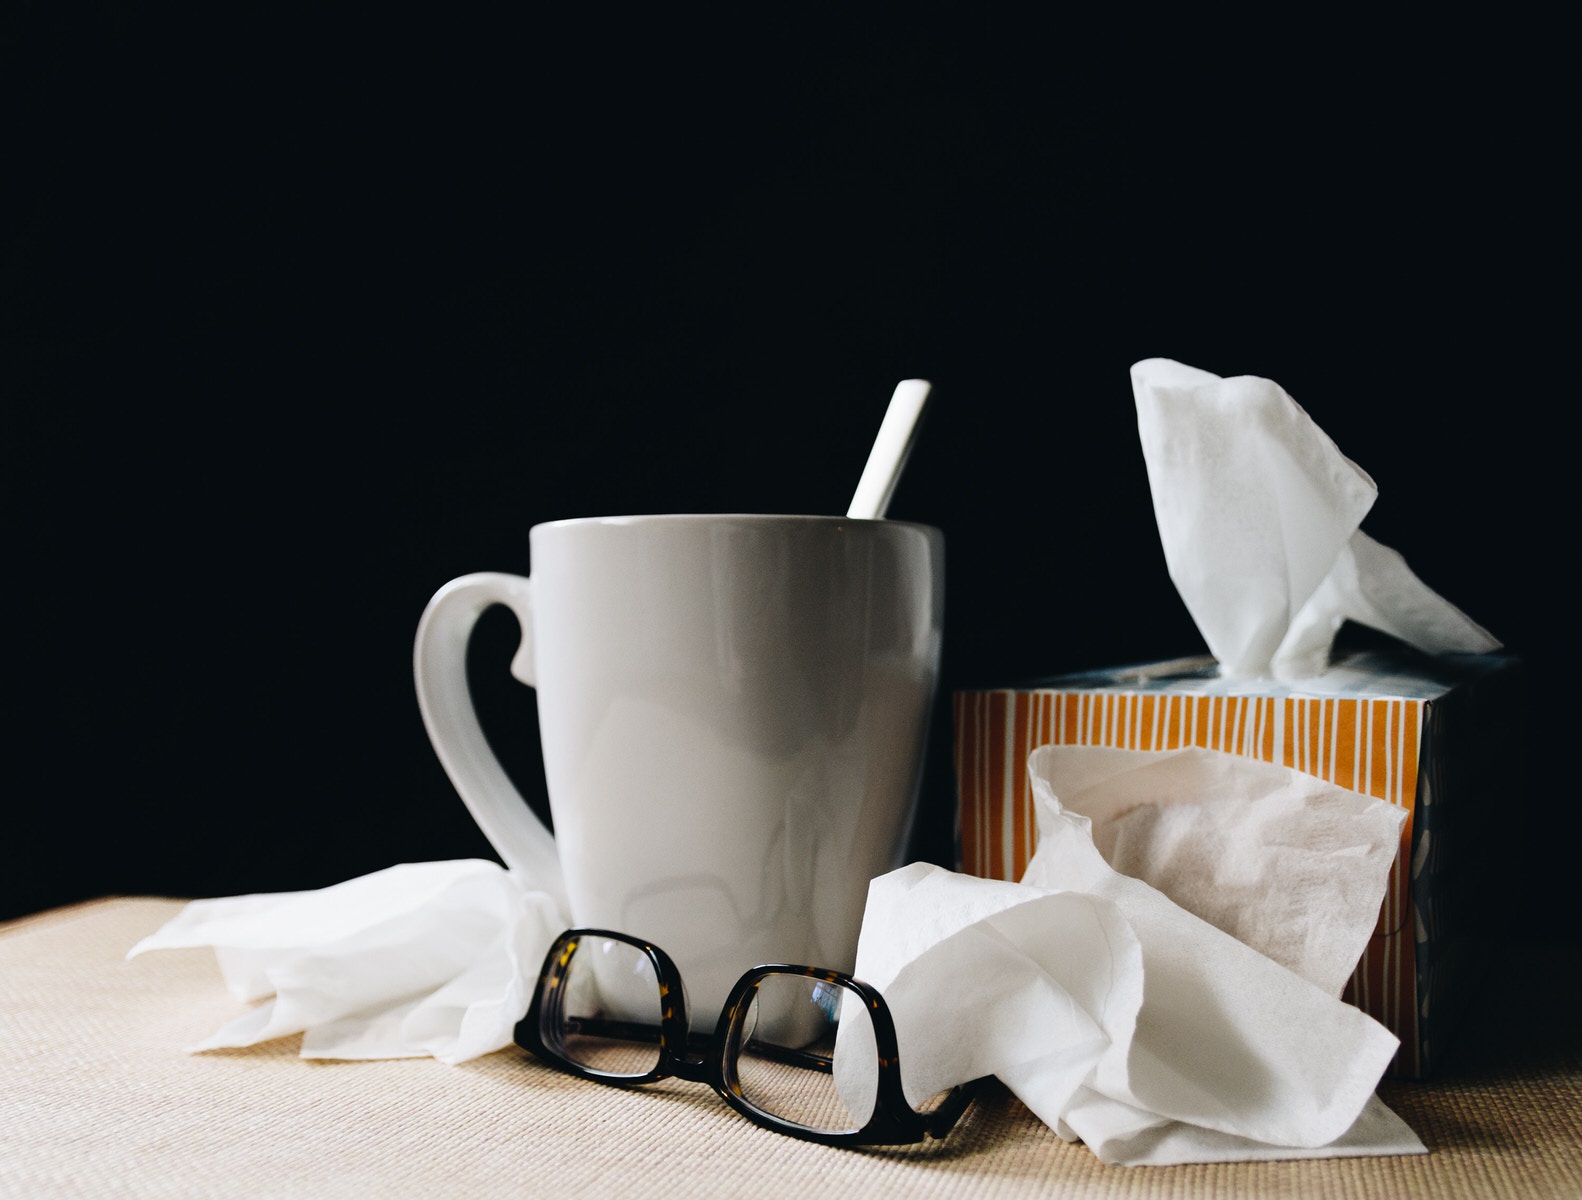 Symptoms of flu and what to do